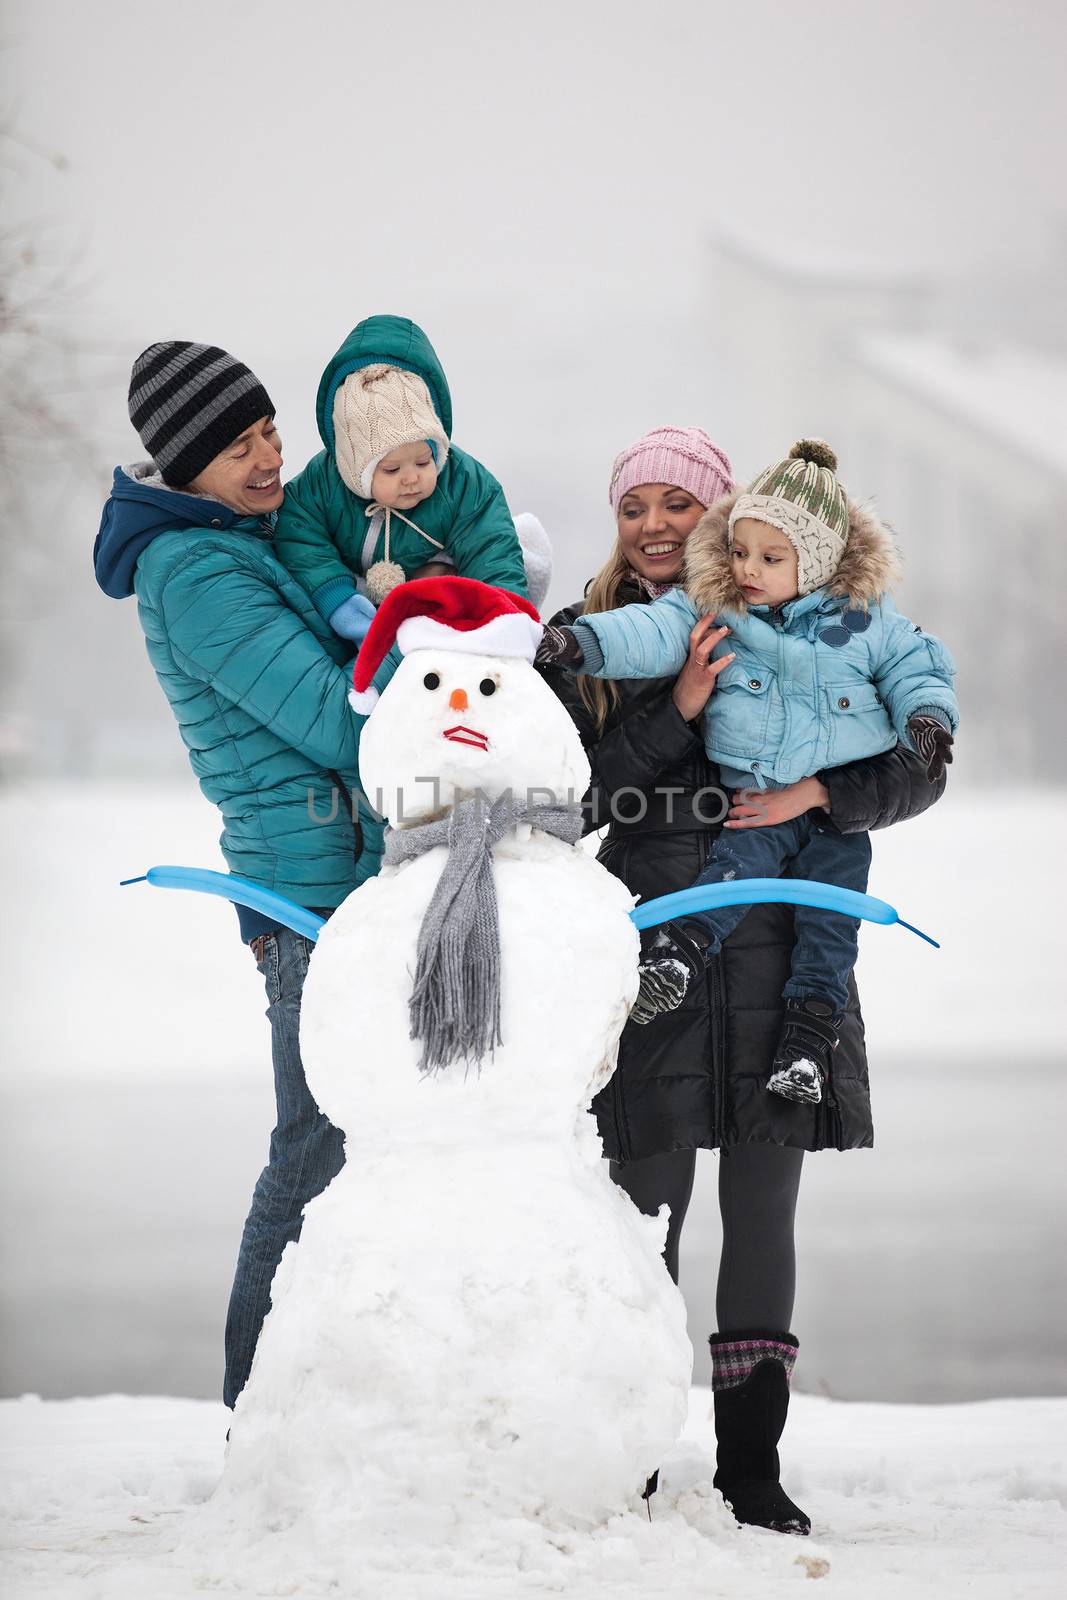 Caucasian family with two sons beside snowman outdoors